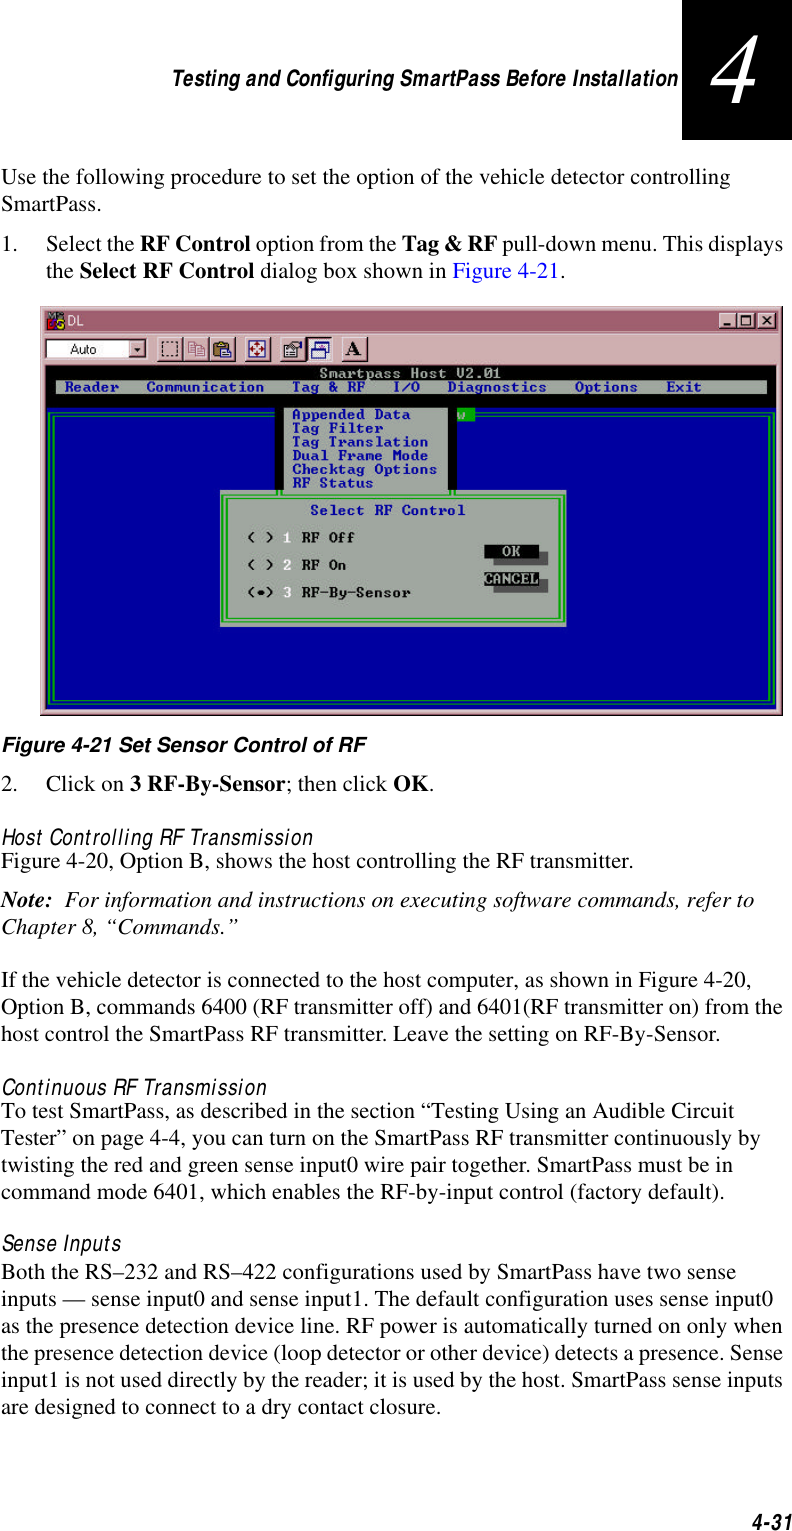 Testing and Configuring SmartPass Before Installation4-314Use the following procedure to set the option of the vehicle detector controlling SmartPass.1. Select the RF Control option from the Tag &amp; RF pull-down menu. This displays the Select RF Control dialog box shown in Figure 4-21. Figure 4-21 Set Sensor Control of RF2. Click on 3 RF-By-Sensor; then click OK.Host Controlling RF TransmissionFigure 4-20, Option B, shows the host controlling the RF transmitter. Note:  For information and instructions on executing software commands, refer to Chapter 8, “Commands.”If the vehicle detector is connected to the host computer, as shown in Figure 4-20, Option B, commands 6400 (RF transmitter off) and 6401(RF transmitter on) from the host control the SmartPass RF transmitter. Leave the setting on RF-By-Sensor. Continuous RF TransmissionTo test SmartPass, as described in the section “Testing Using an Audible Circuit Tester” on page 4-4, you can turn on the SmartPass RF transmitter continuously by twisting the red and green sense input0 wire pair together. SmartPass must be in command mode 6401, which enables the RF-by-input control (factory default). Sense InputsBoth the RS–232 and RS–422 configurations used by SmartPass have two sense inputs — sense input0 and sense input1. The default configuration uses sense input0 as the presence detection device line. RF power is automatically turned on only when the presence detection device (loop detector or other device) detects a presence. Sense input1 is not used directly by the reader; it is used by the host. SmartPass sense inputs are designed to connect to a dry contact closure. 